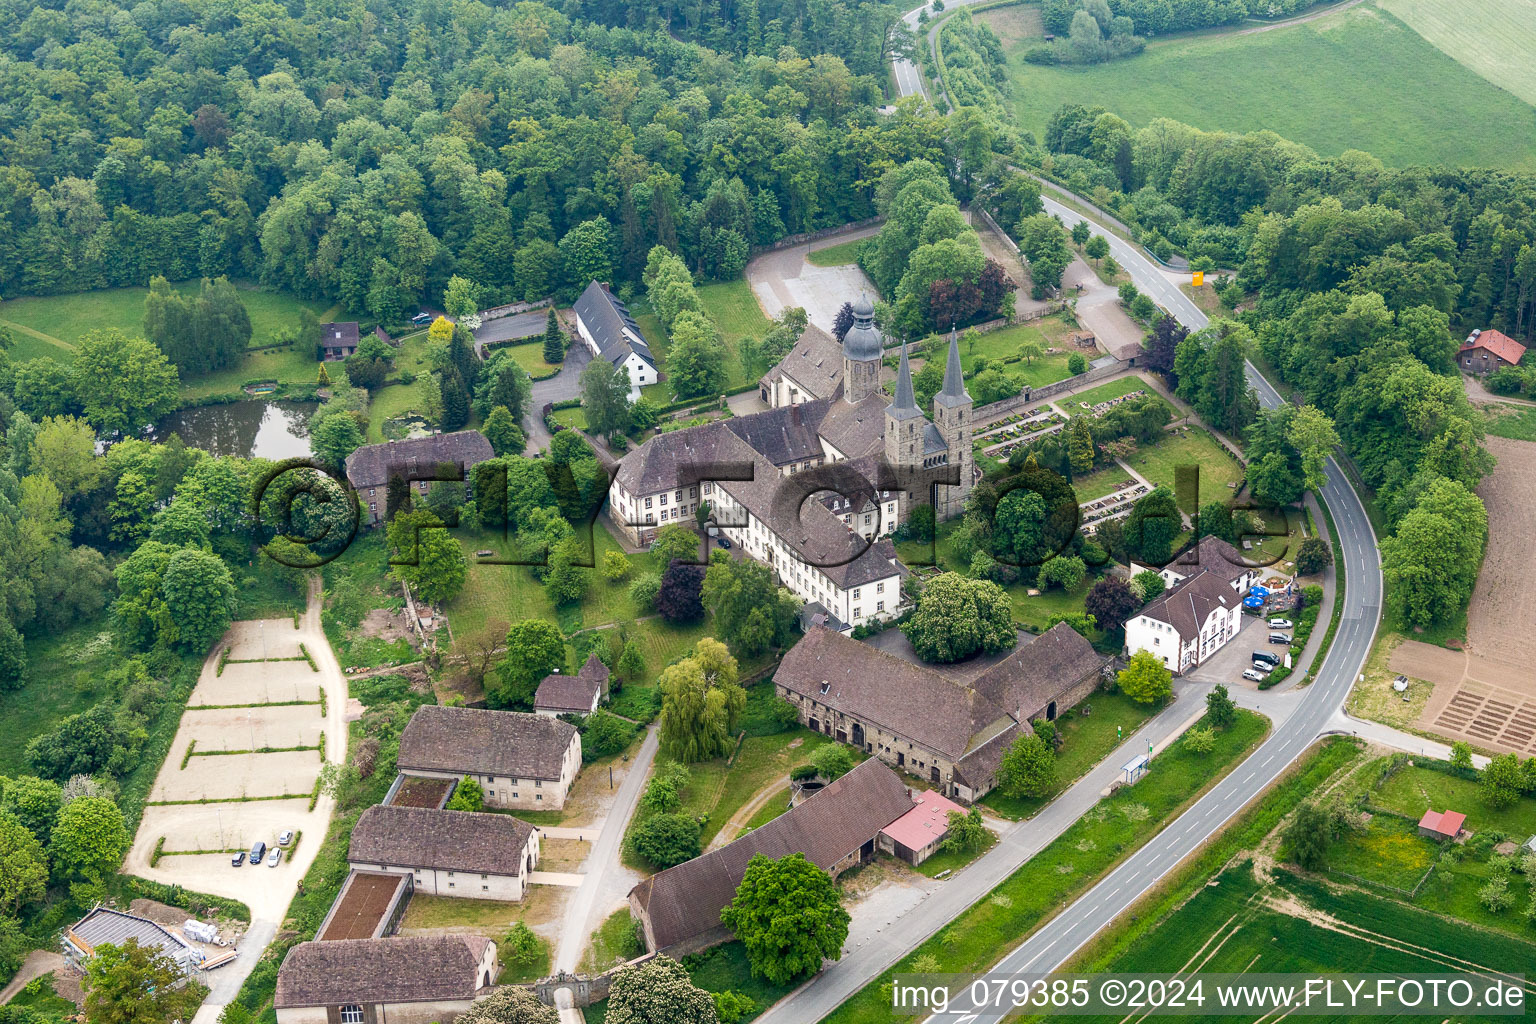 Complex of buildings of the monastery and epistorial church St. Jakobus the old in Marienmuenster in the state North Rhine-Westphalia, Germany